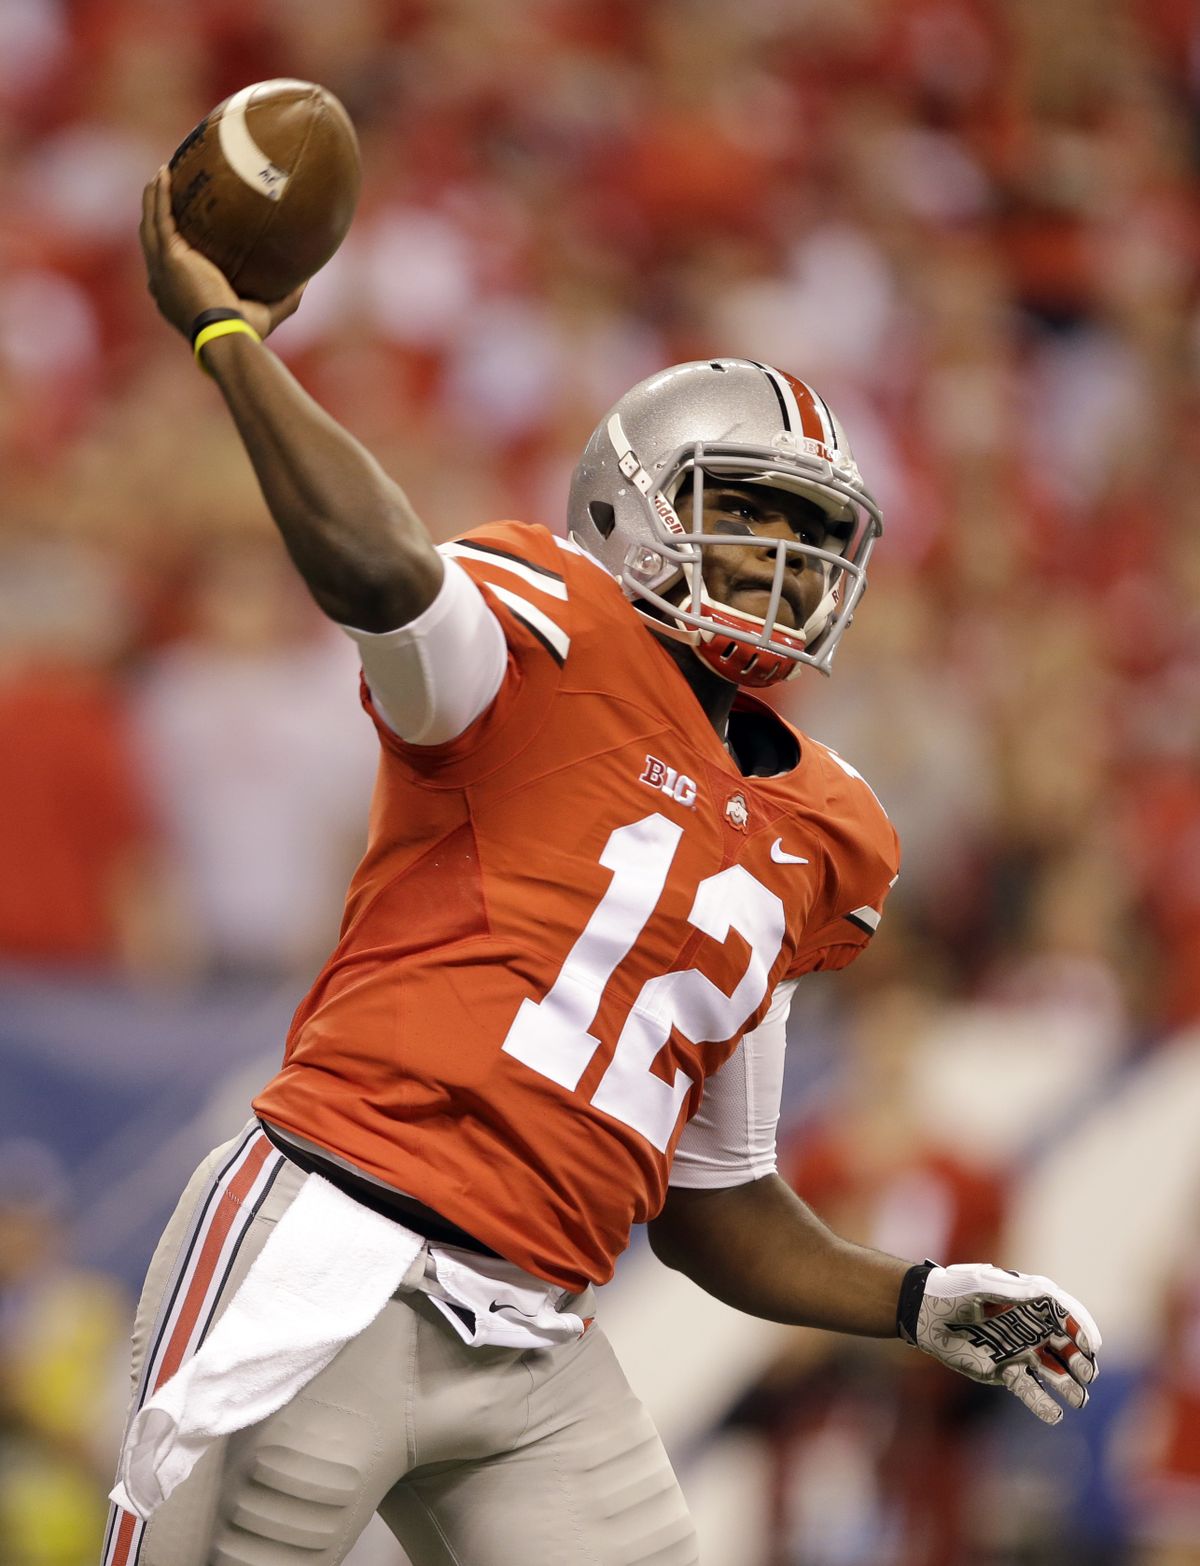 Ohio State QB Cardale Jones has arm strength and mobility. (Associated Press)